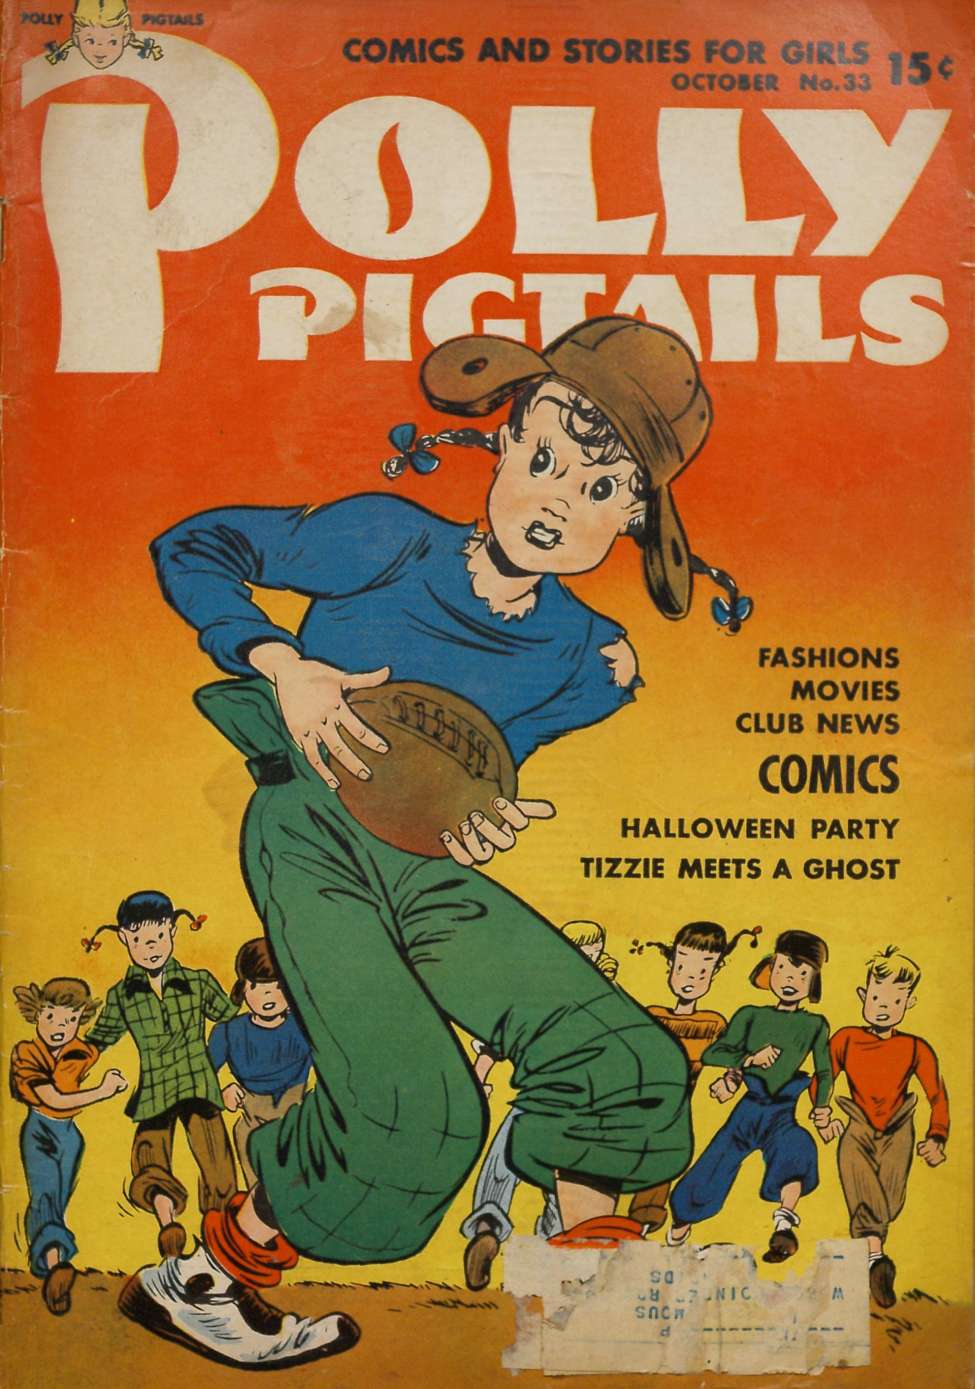 Comic Book Cover For Polly Pigtails 33